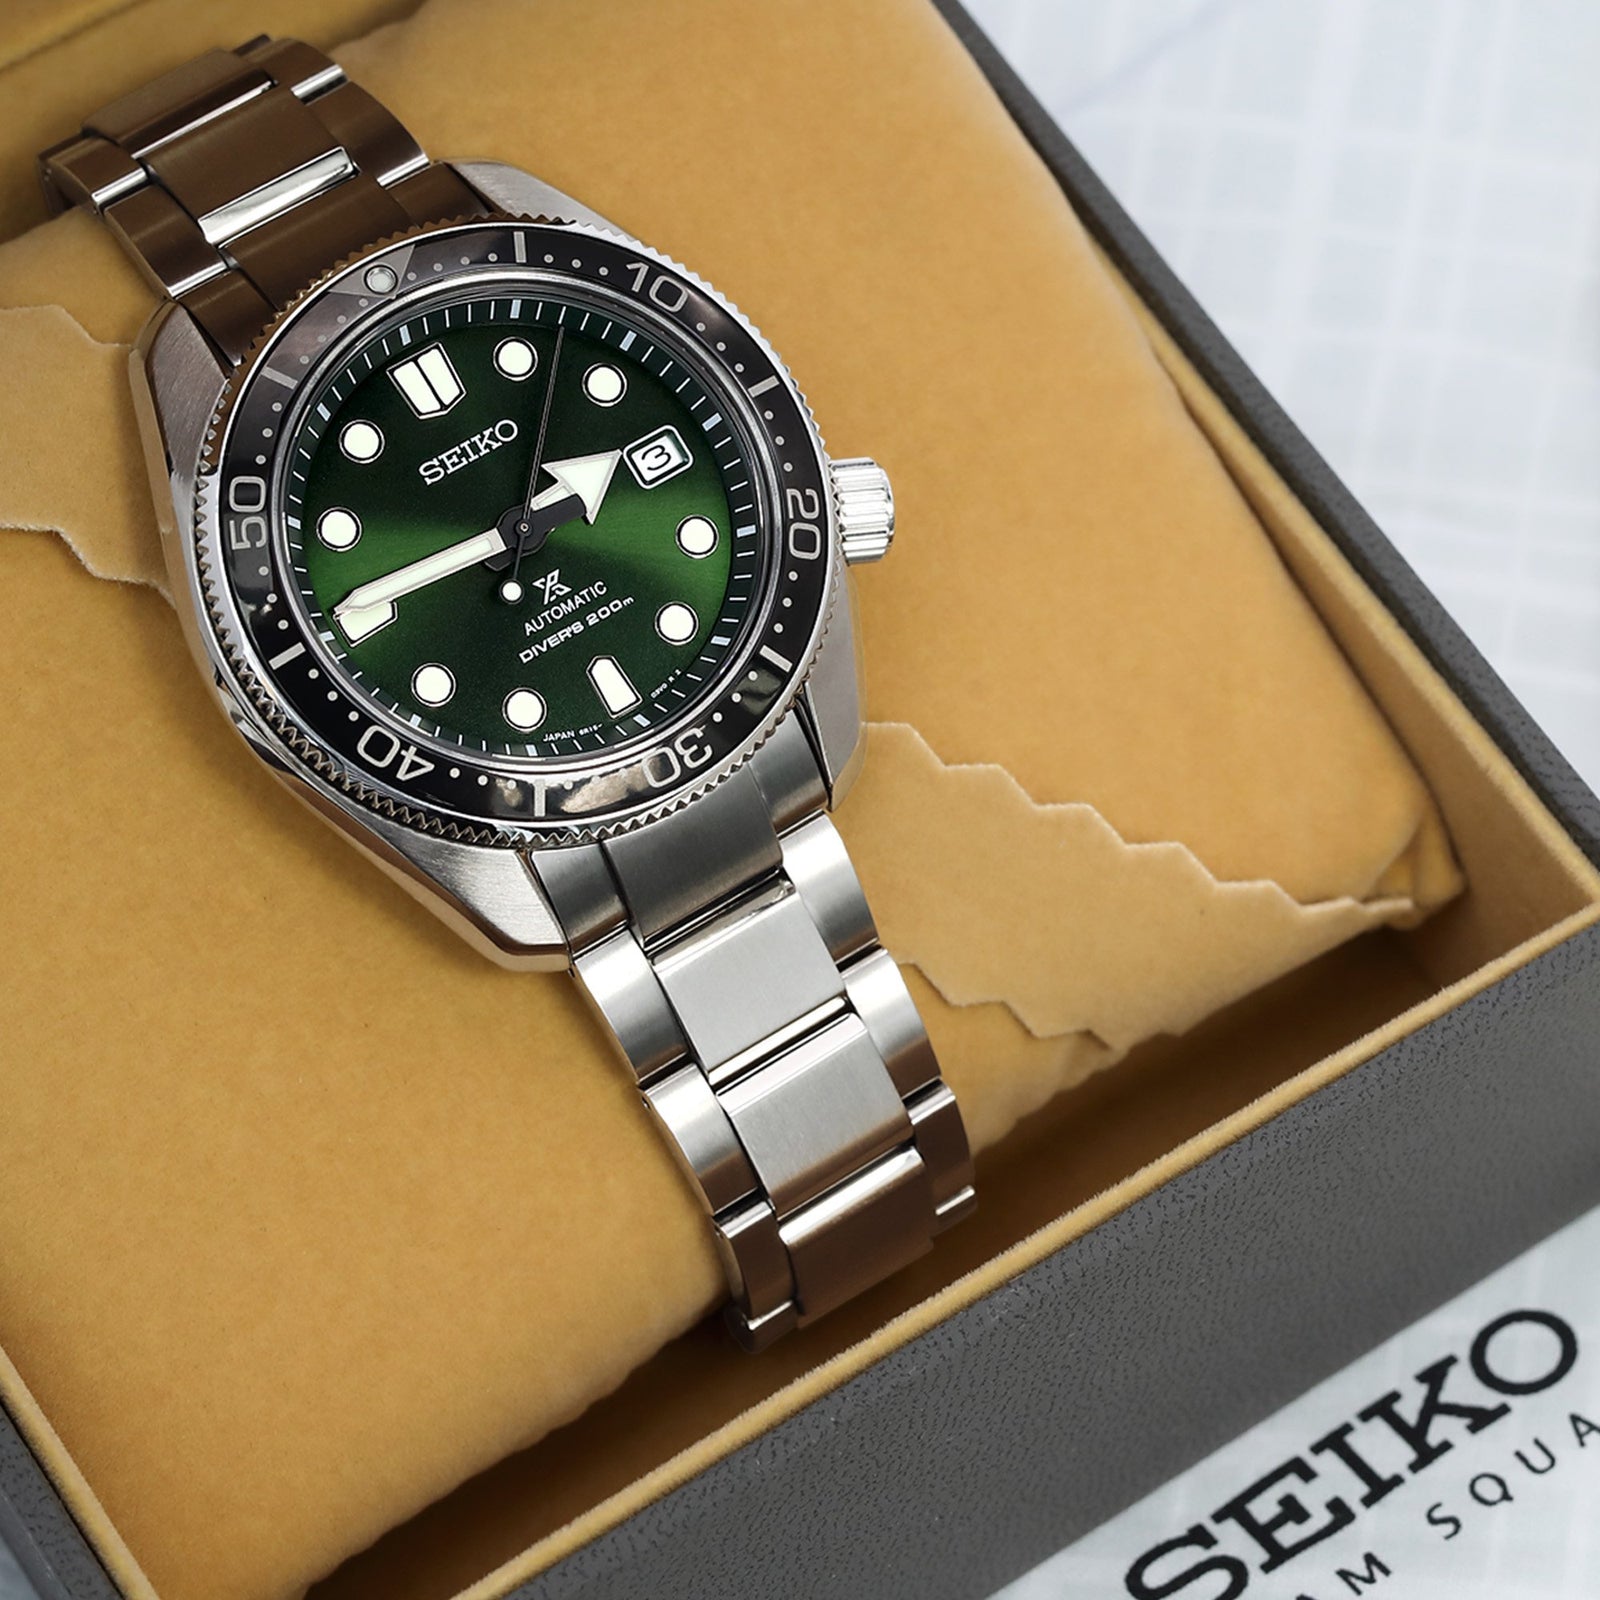 Seiko Baby MM SBDC079 Tokyo GINZA LIMITED EDITION Review | Strapcode